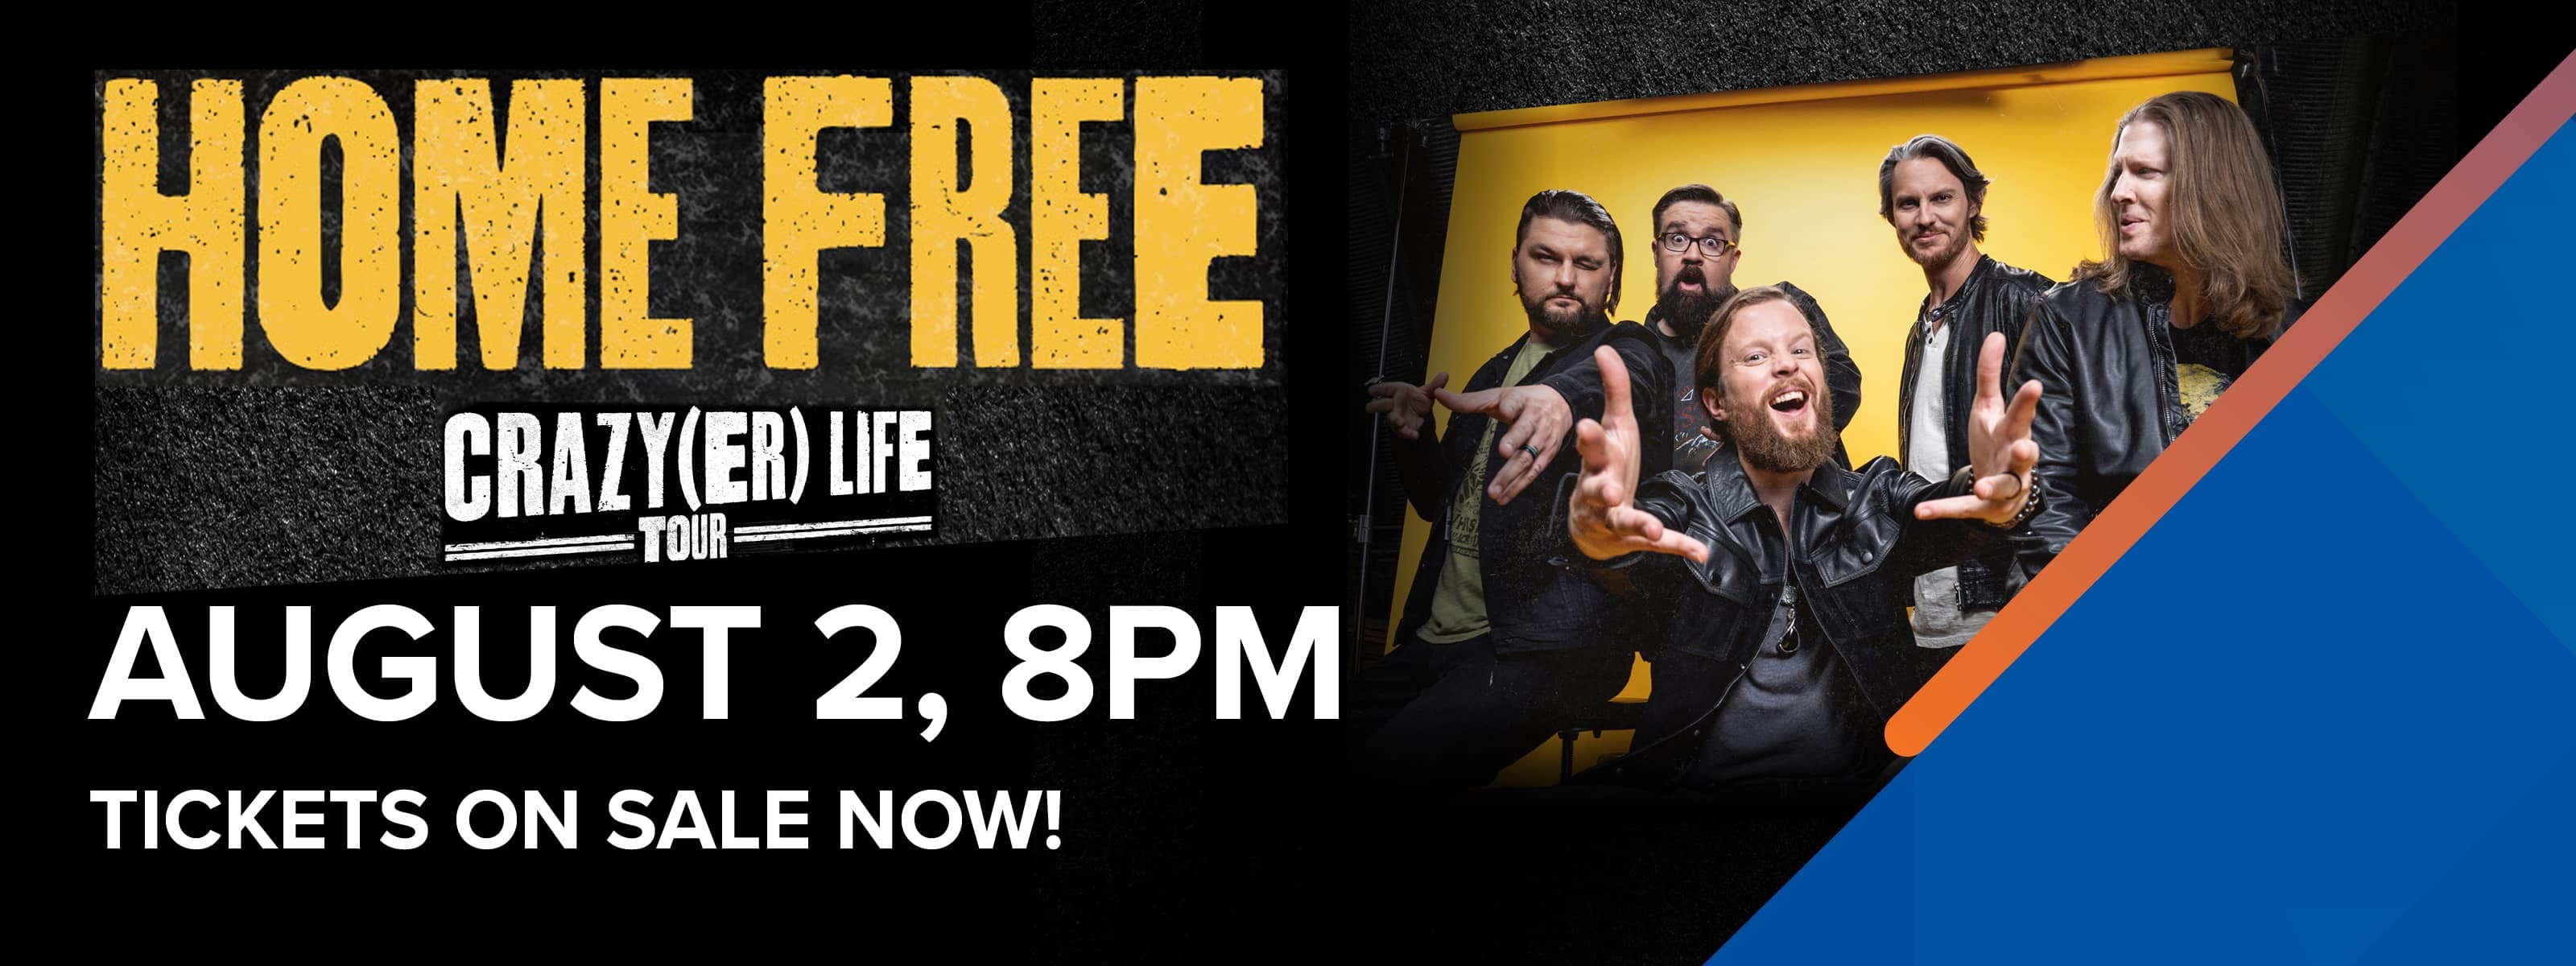 Home Free: Crazy(er) Life Tour - August 2, 8pm Tickets On Sale Now